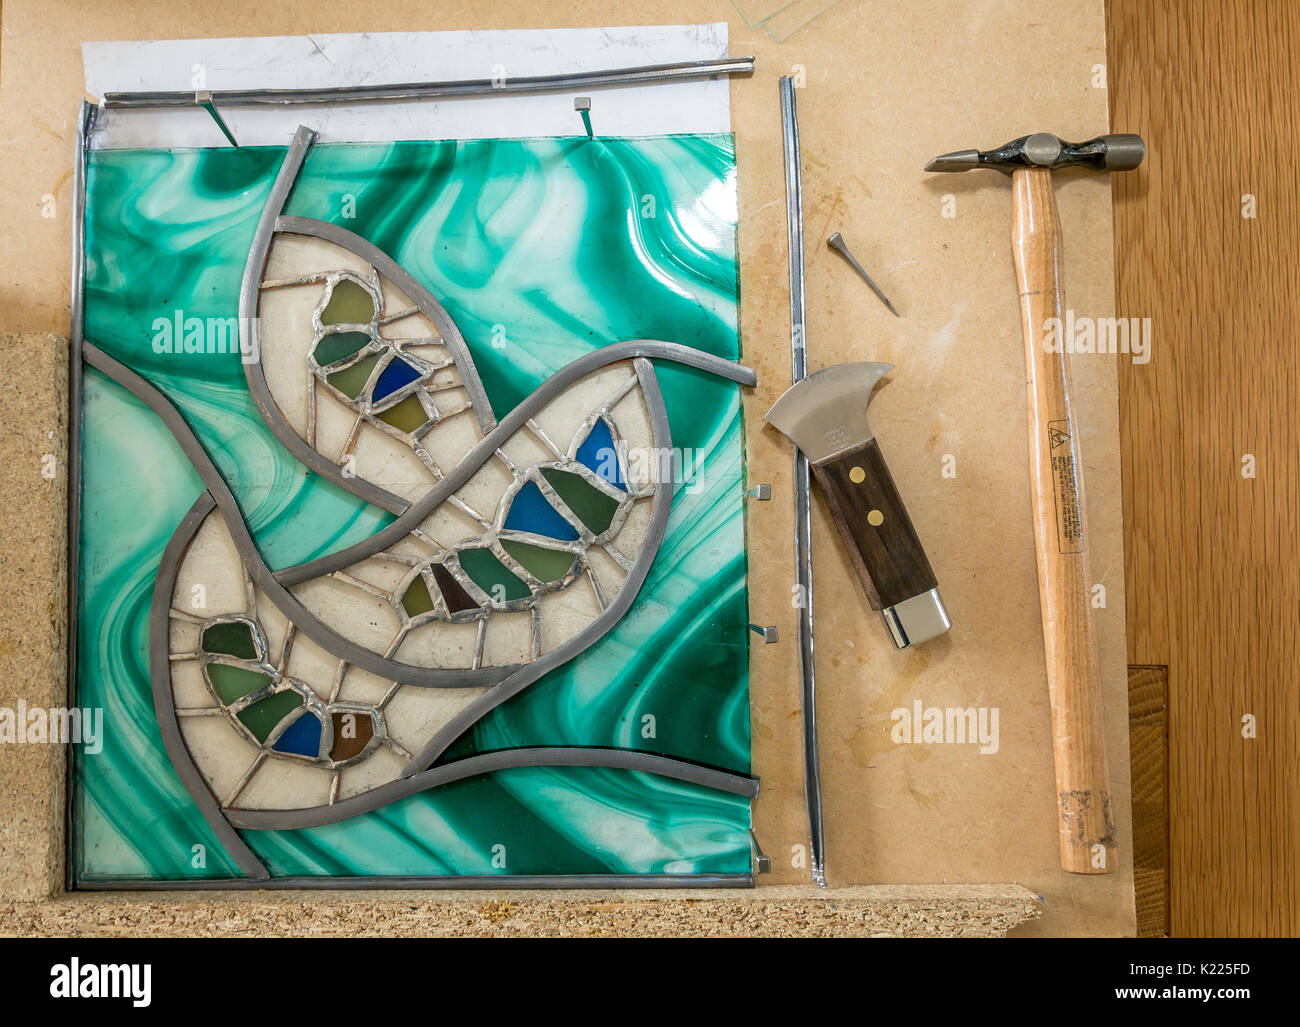 Work in progress making stained glass and sea glass art work project with lead came. Work board with lead came, hammer, horseshoe nails and lead knife Stock Photo